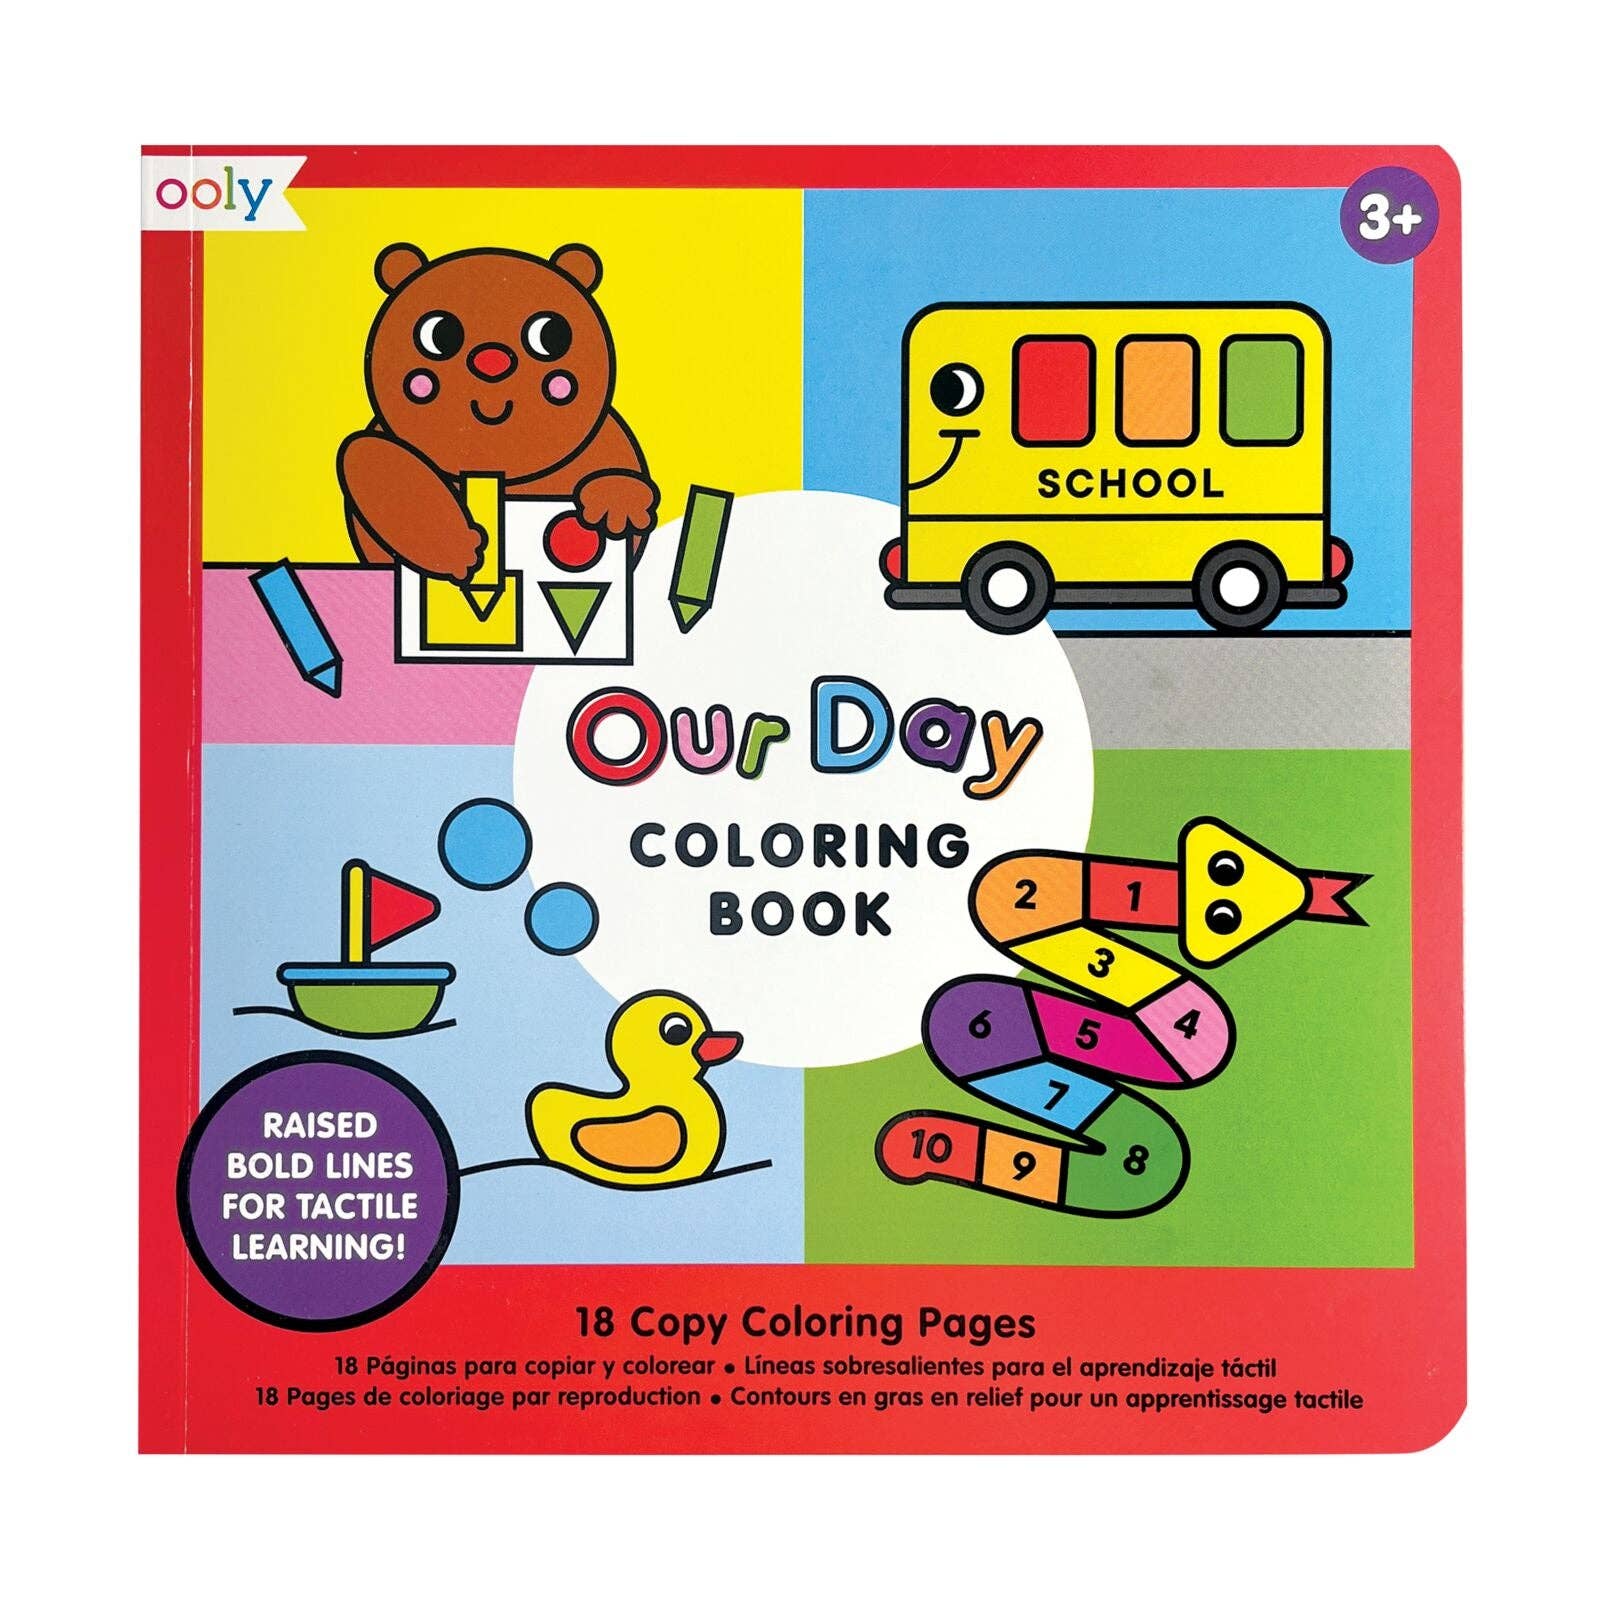 "Our Day" Copy Coloring Book